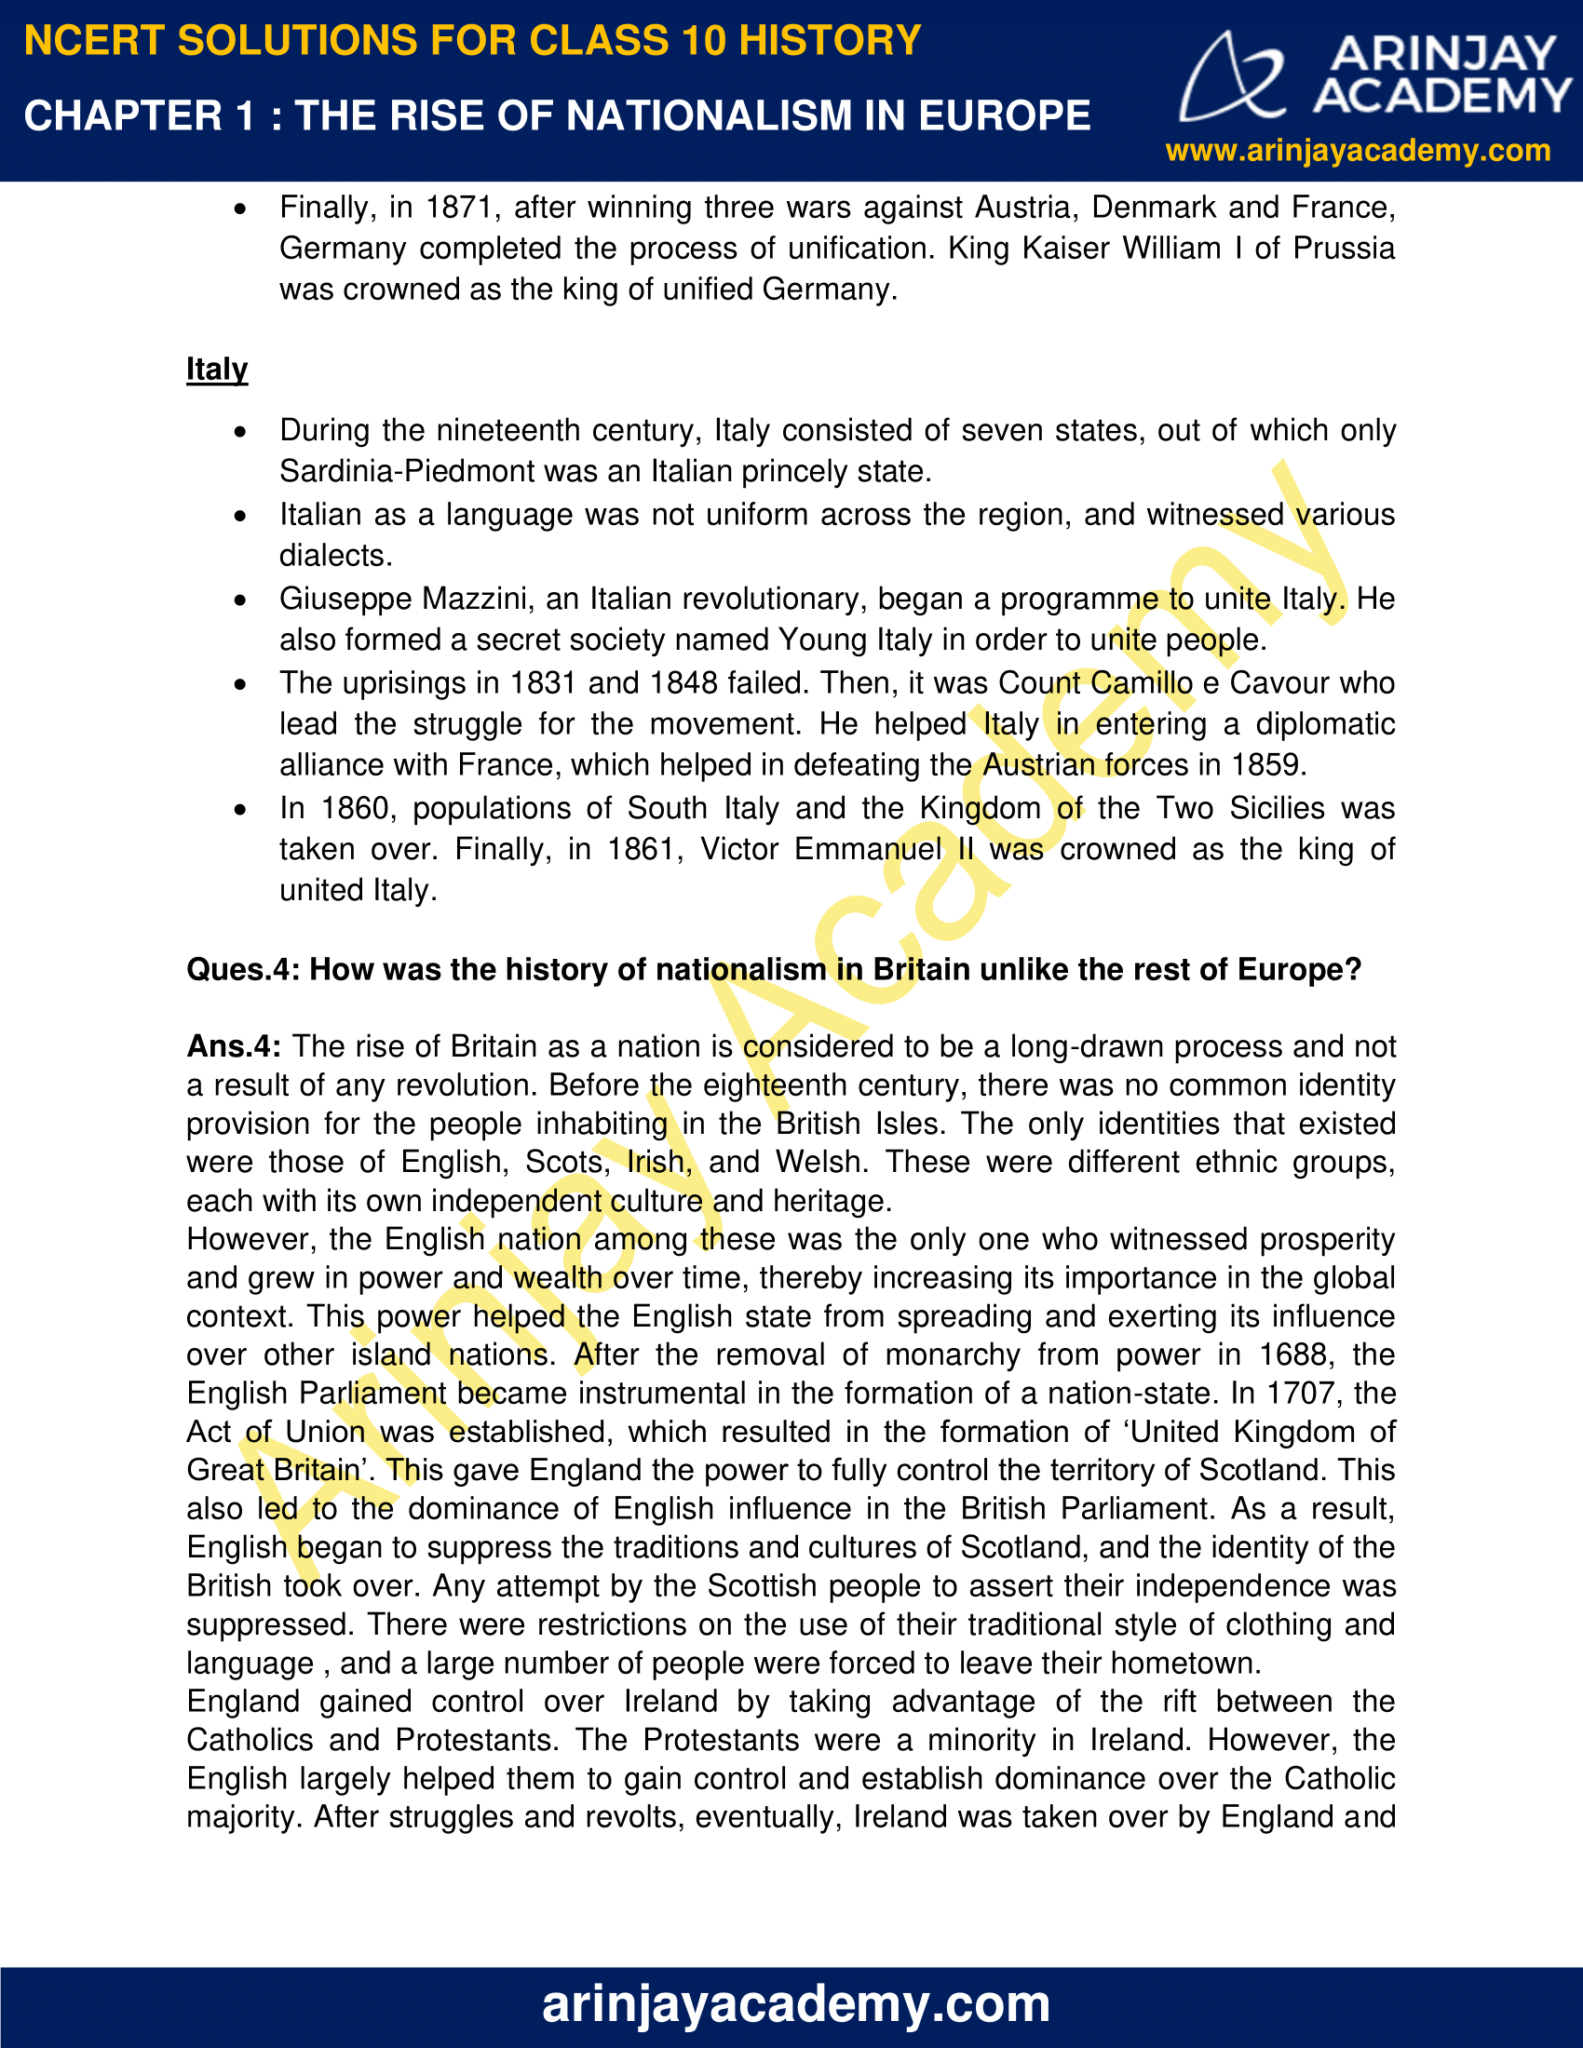 case study questions class 10 history chapter 1